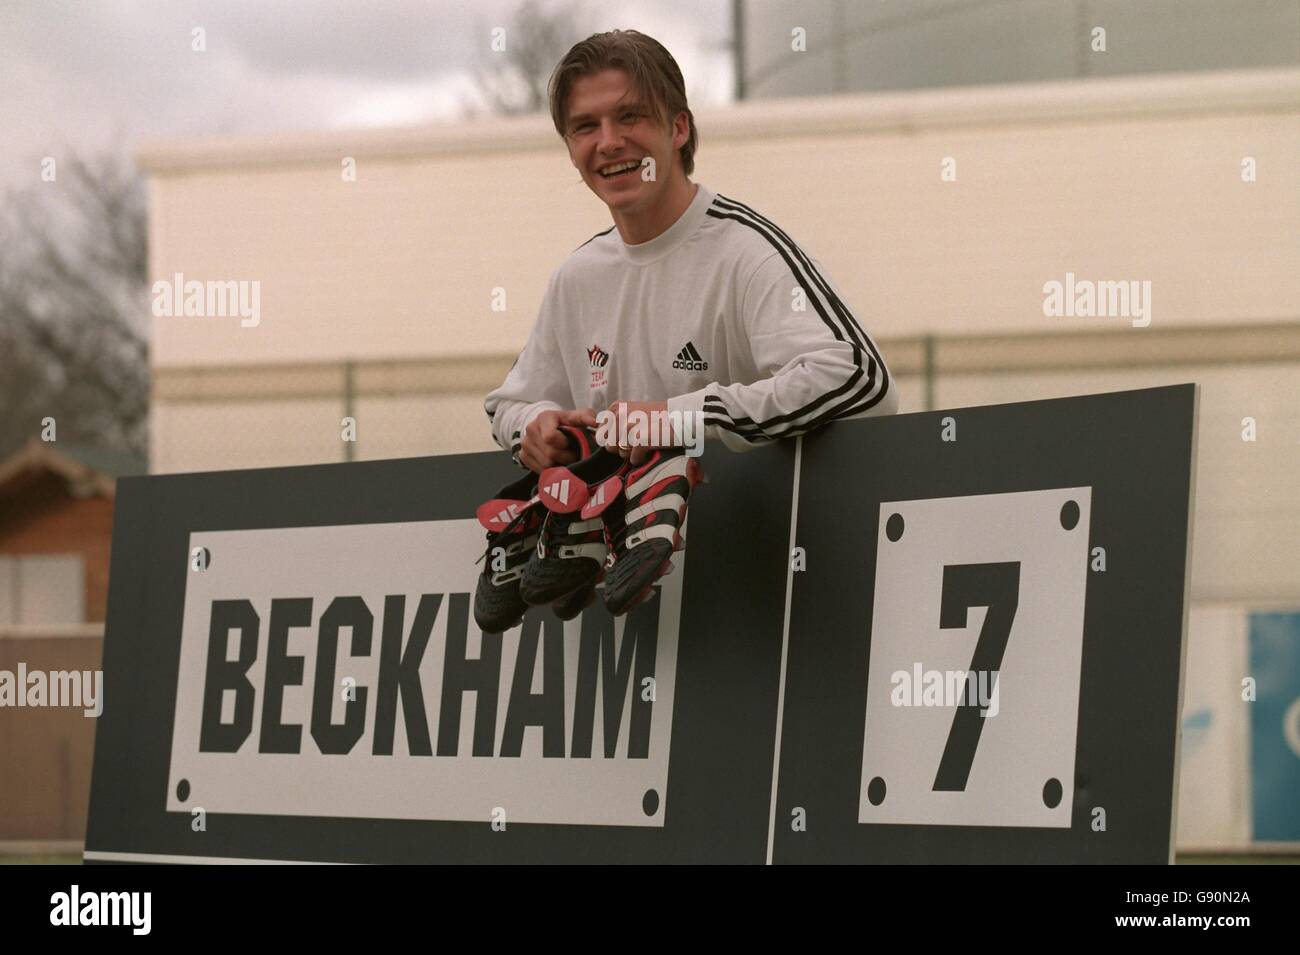 Soccer - David Beckham Signs a Boot Contract With Adidas Stock Photo - Alamy